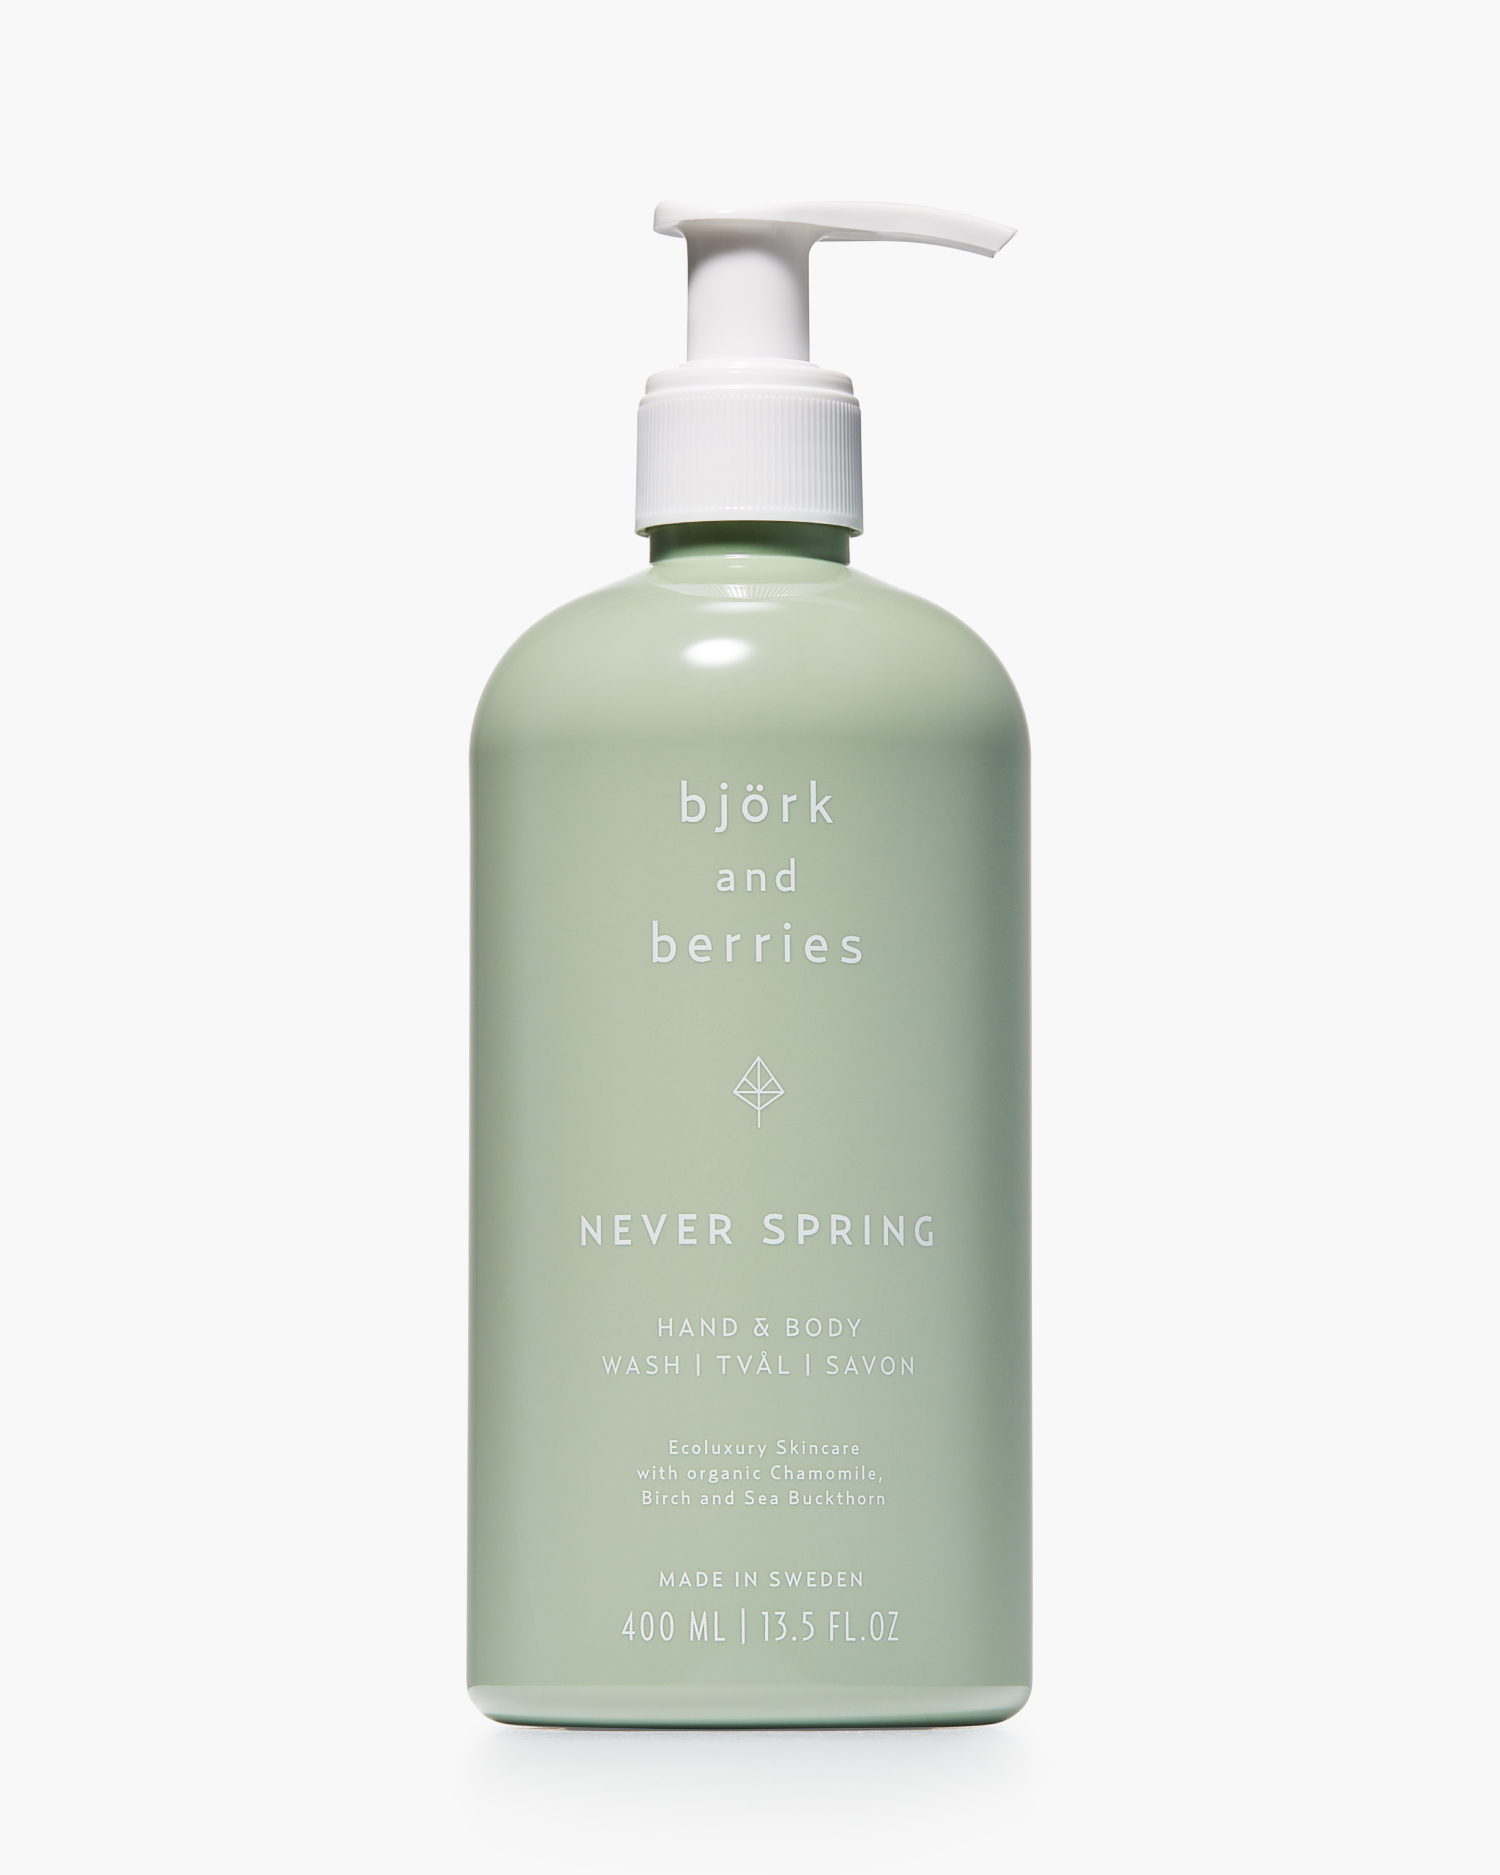 NEVER SPRING HAND & BODY WASH 400ml